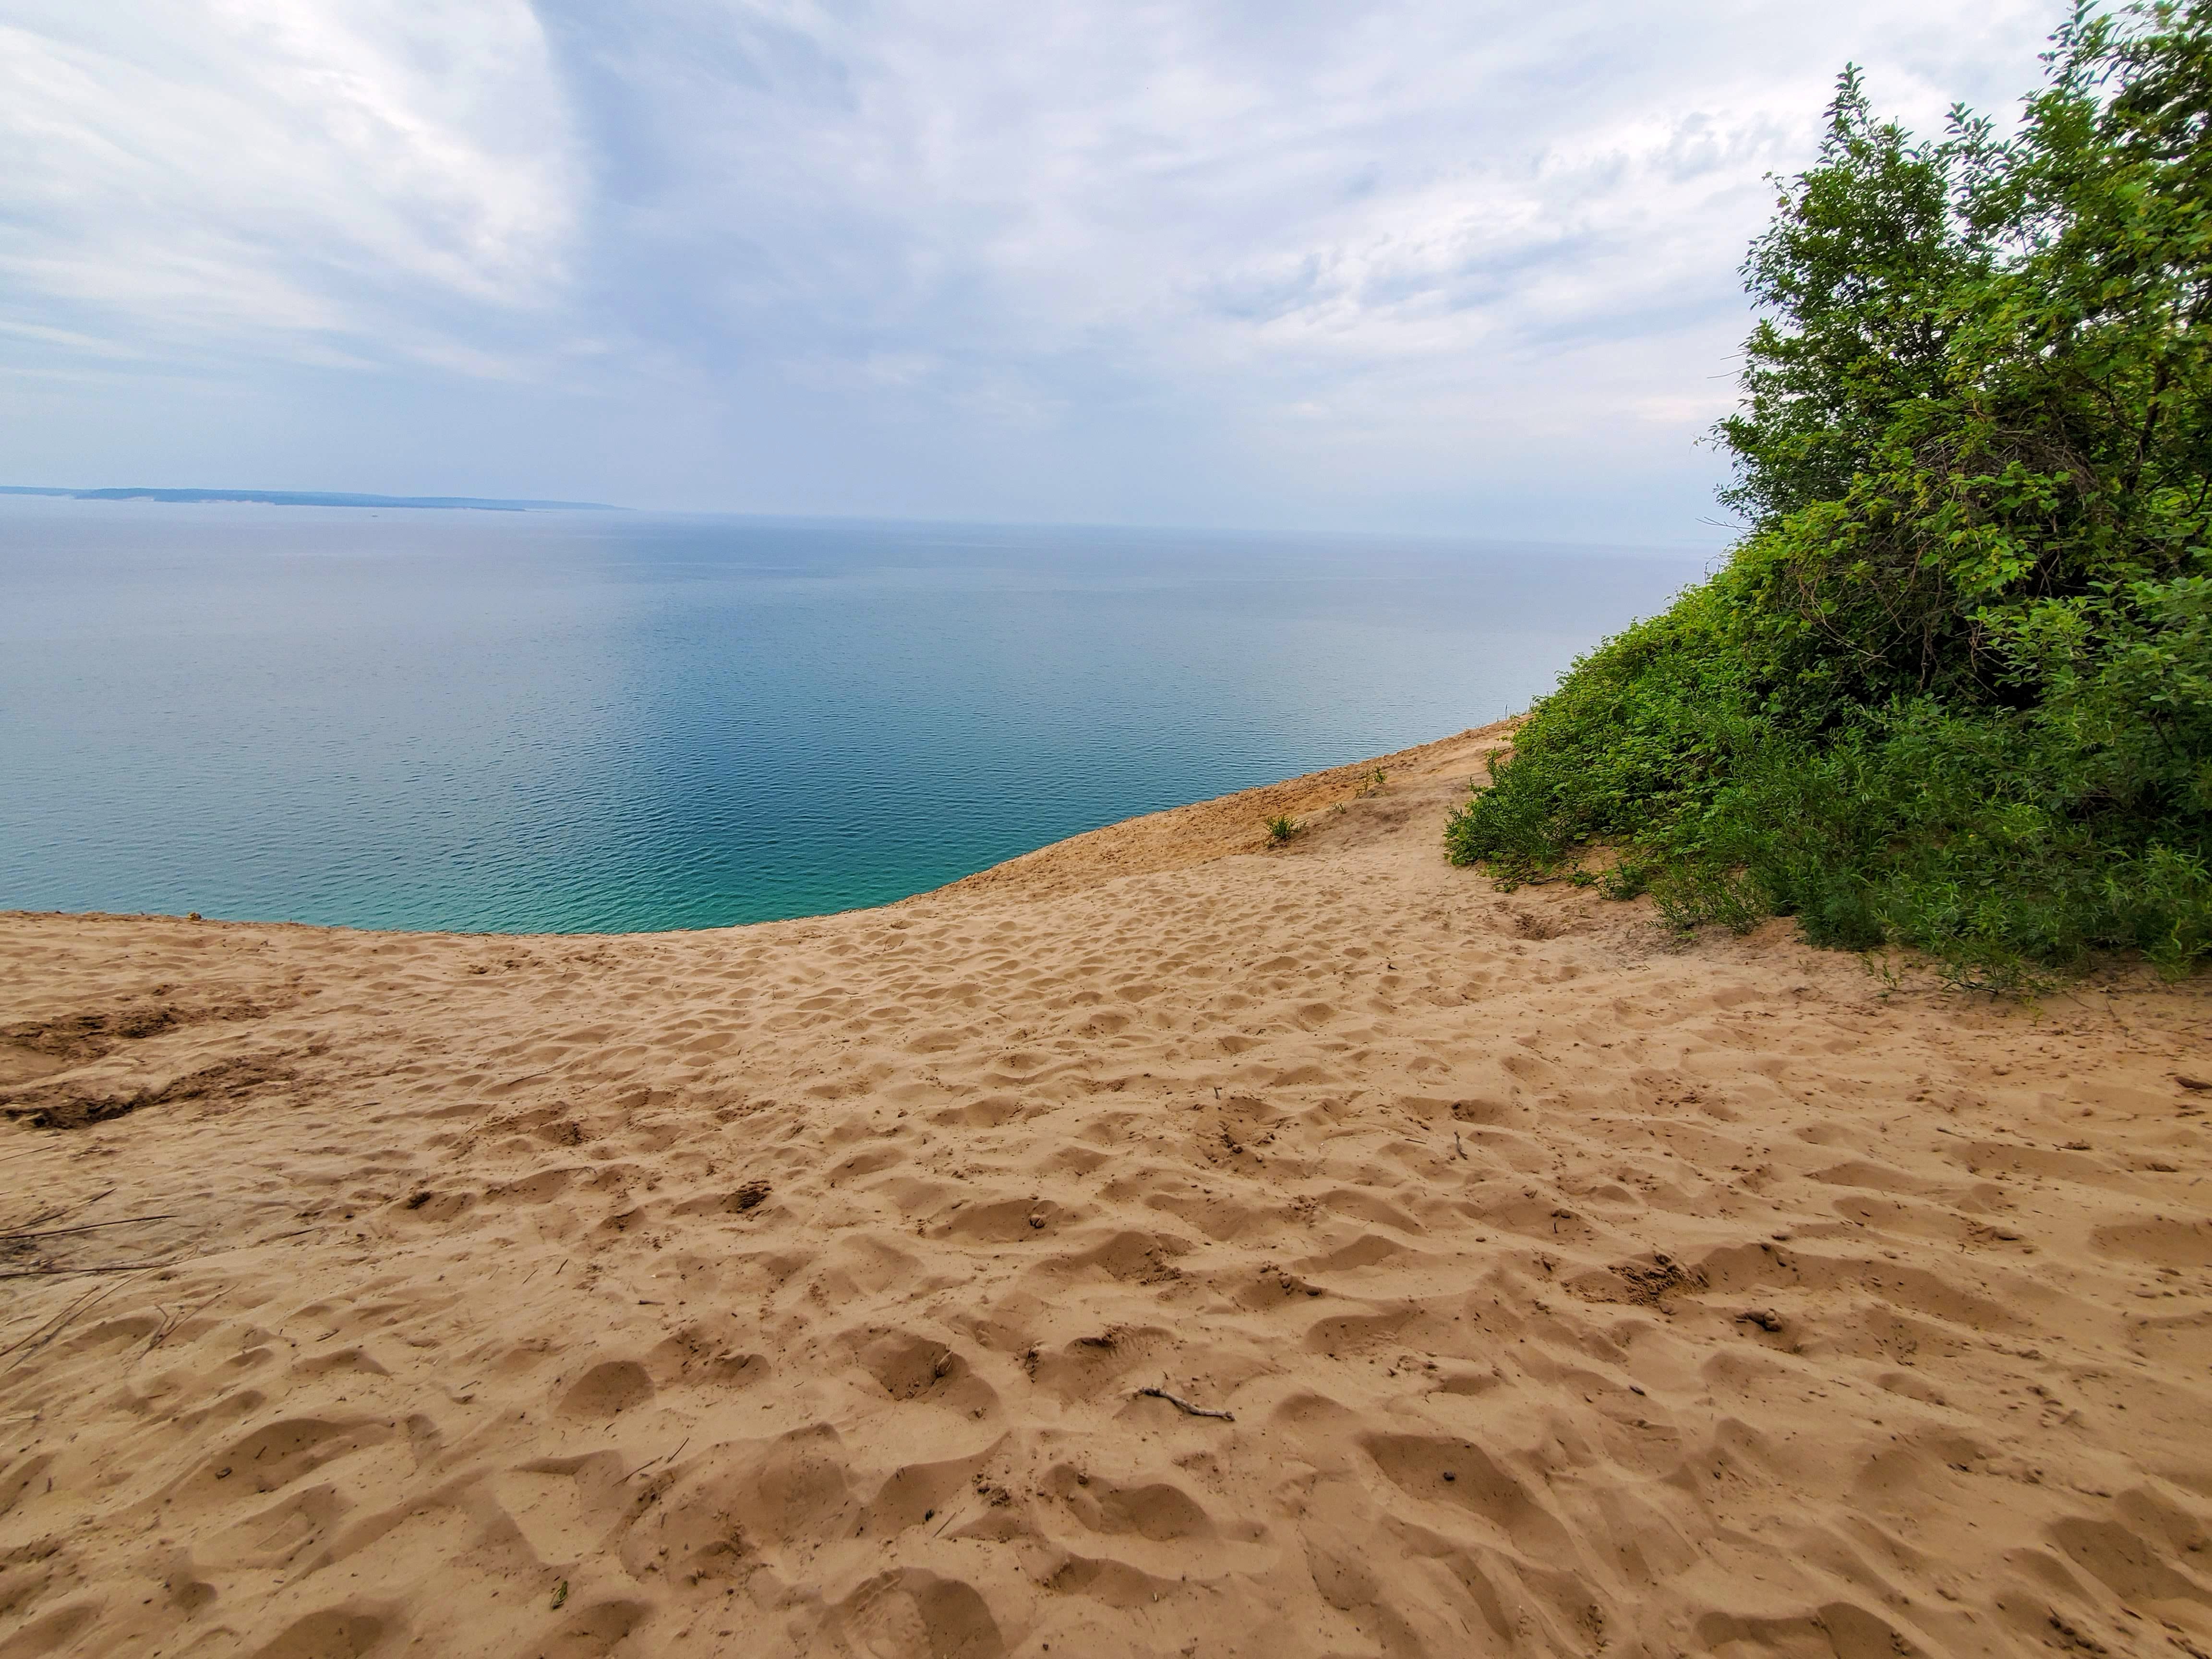 The Story of the Sand Dunes - Sleeping Bear Dunes National Lakeshore (U.S.  National Park Service)